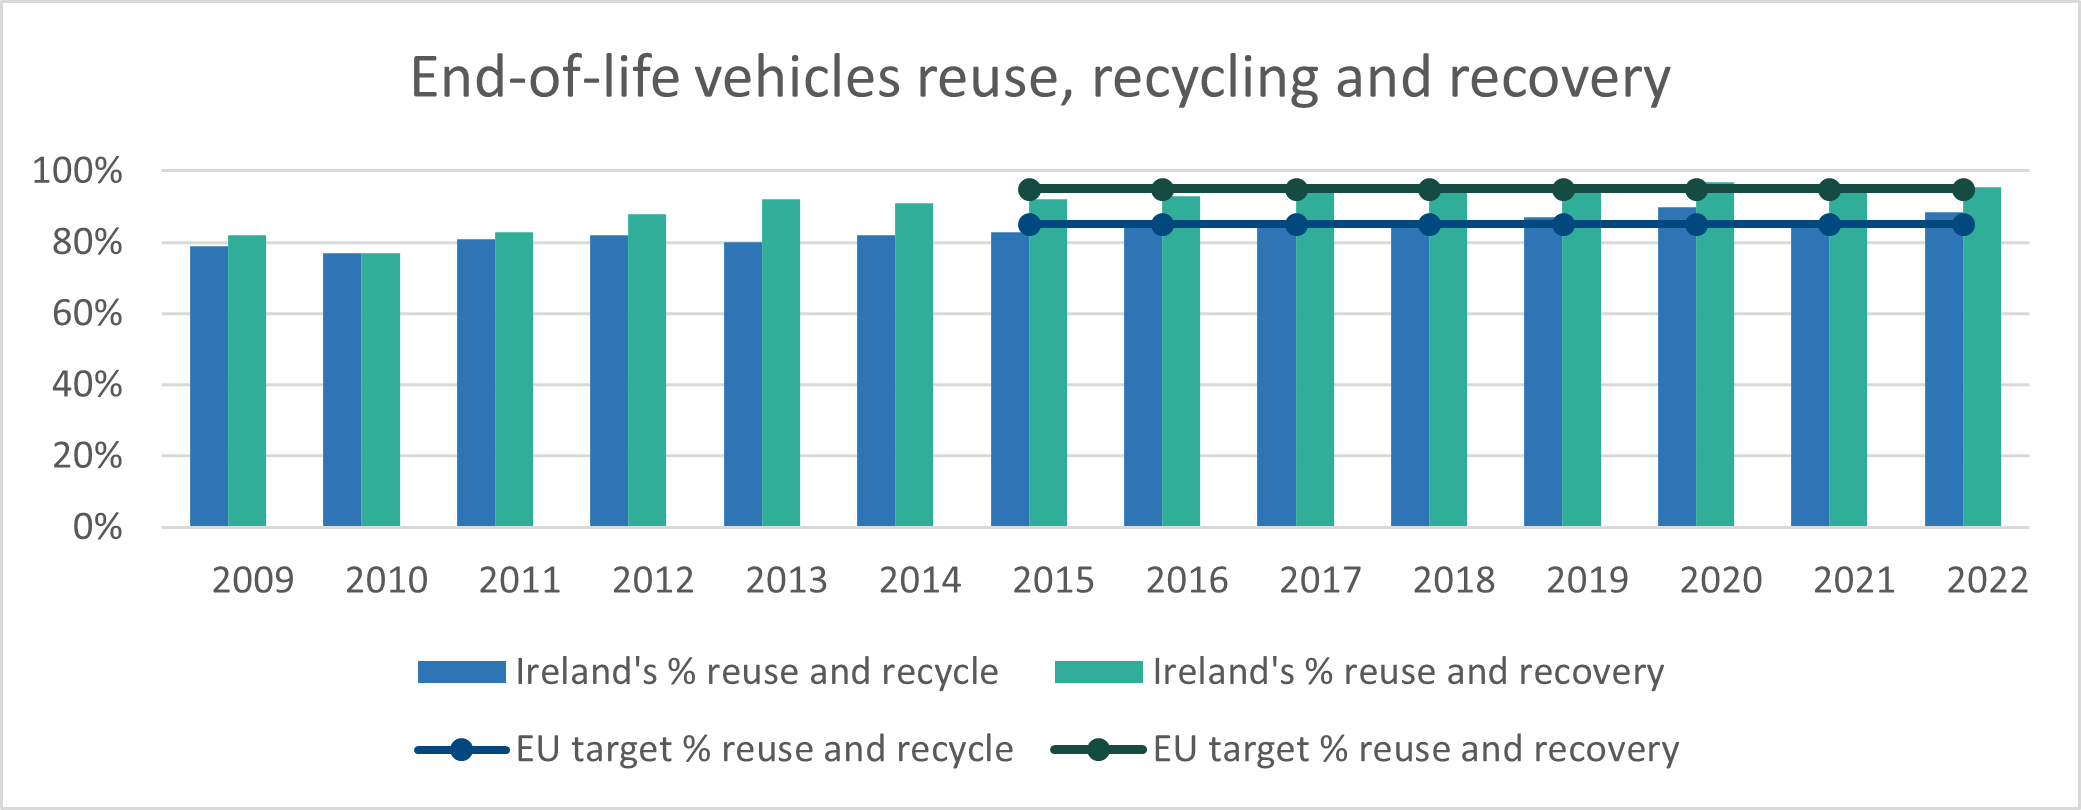 Figure 1 shows that Ireland’s total reuse and recycling rates from 2010 to reference year 2022. The 2022 rate of 88.47% is similar to last year’s rate of 87.81% in 2021.   The figure also shows total reuse and recovery rates, which show a similar overall trend. The 2022 reuse and recovery rate was 95.49%, and the rate in 2021 was 95.74%.